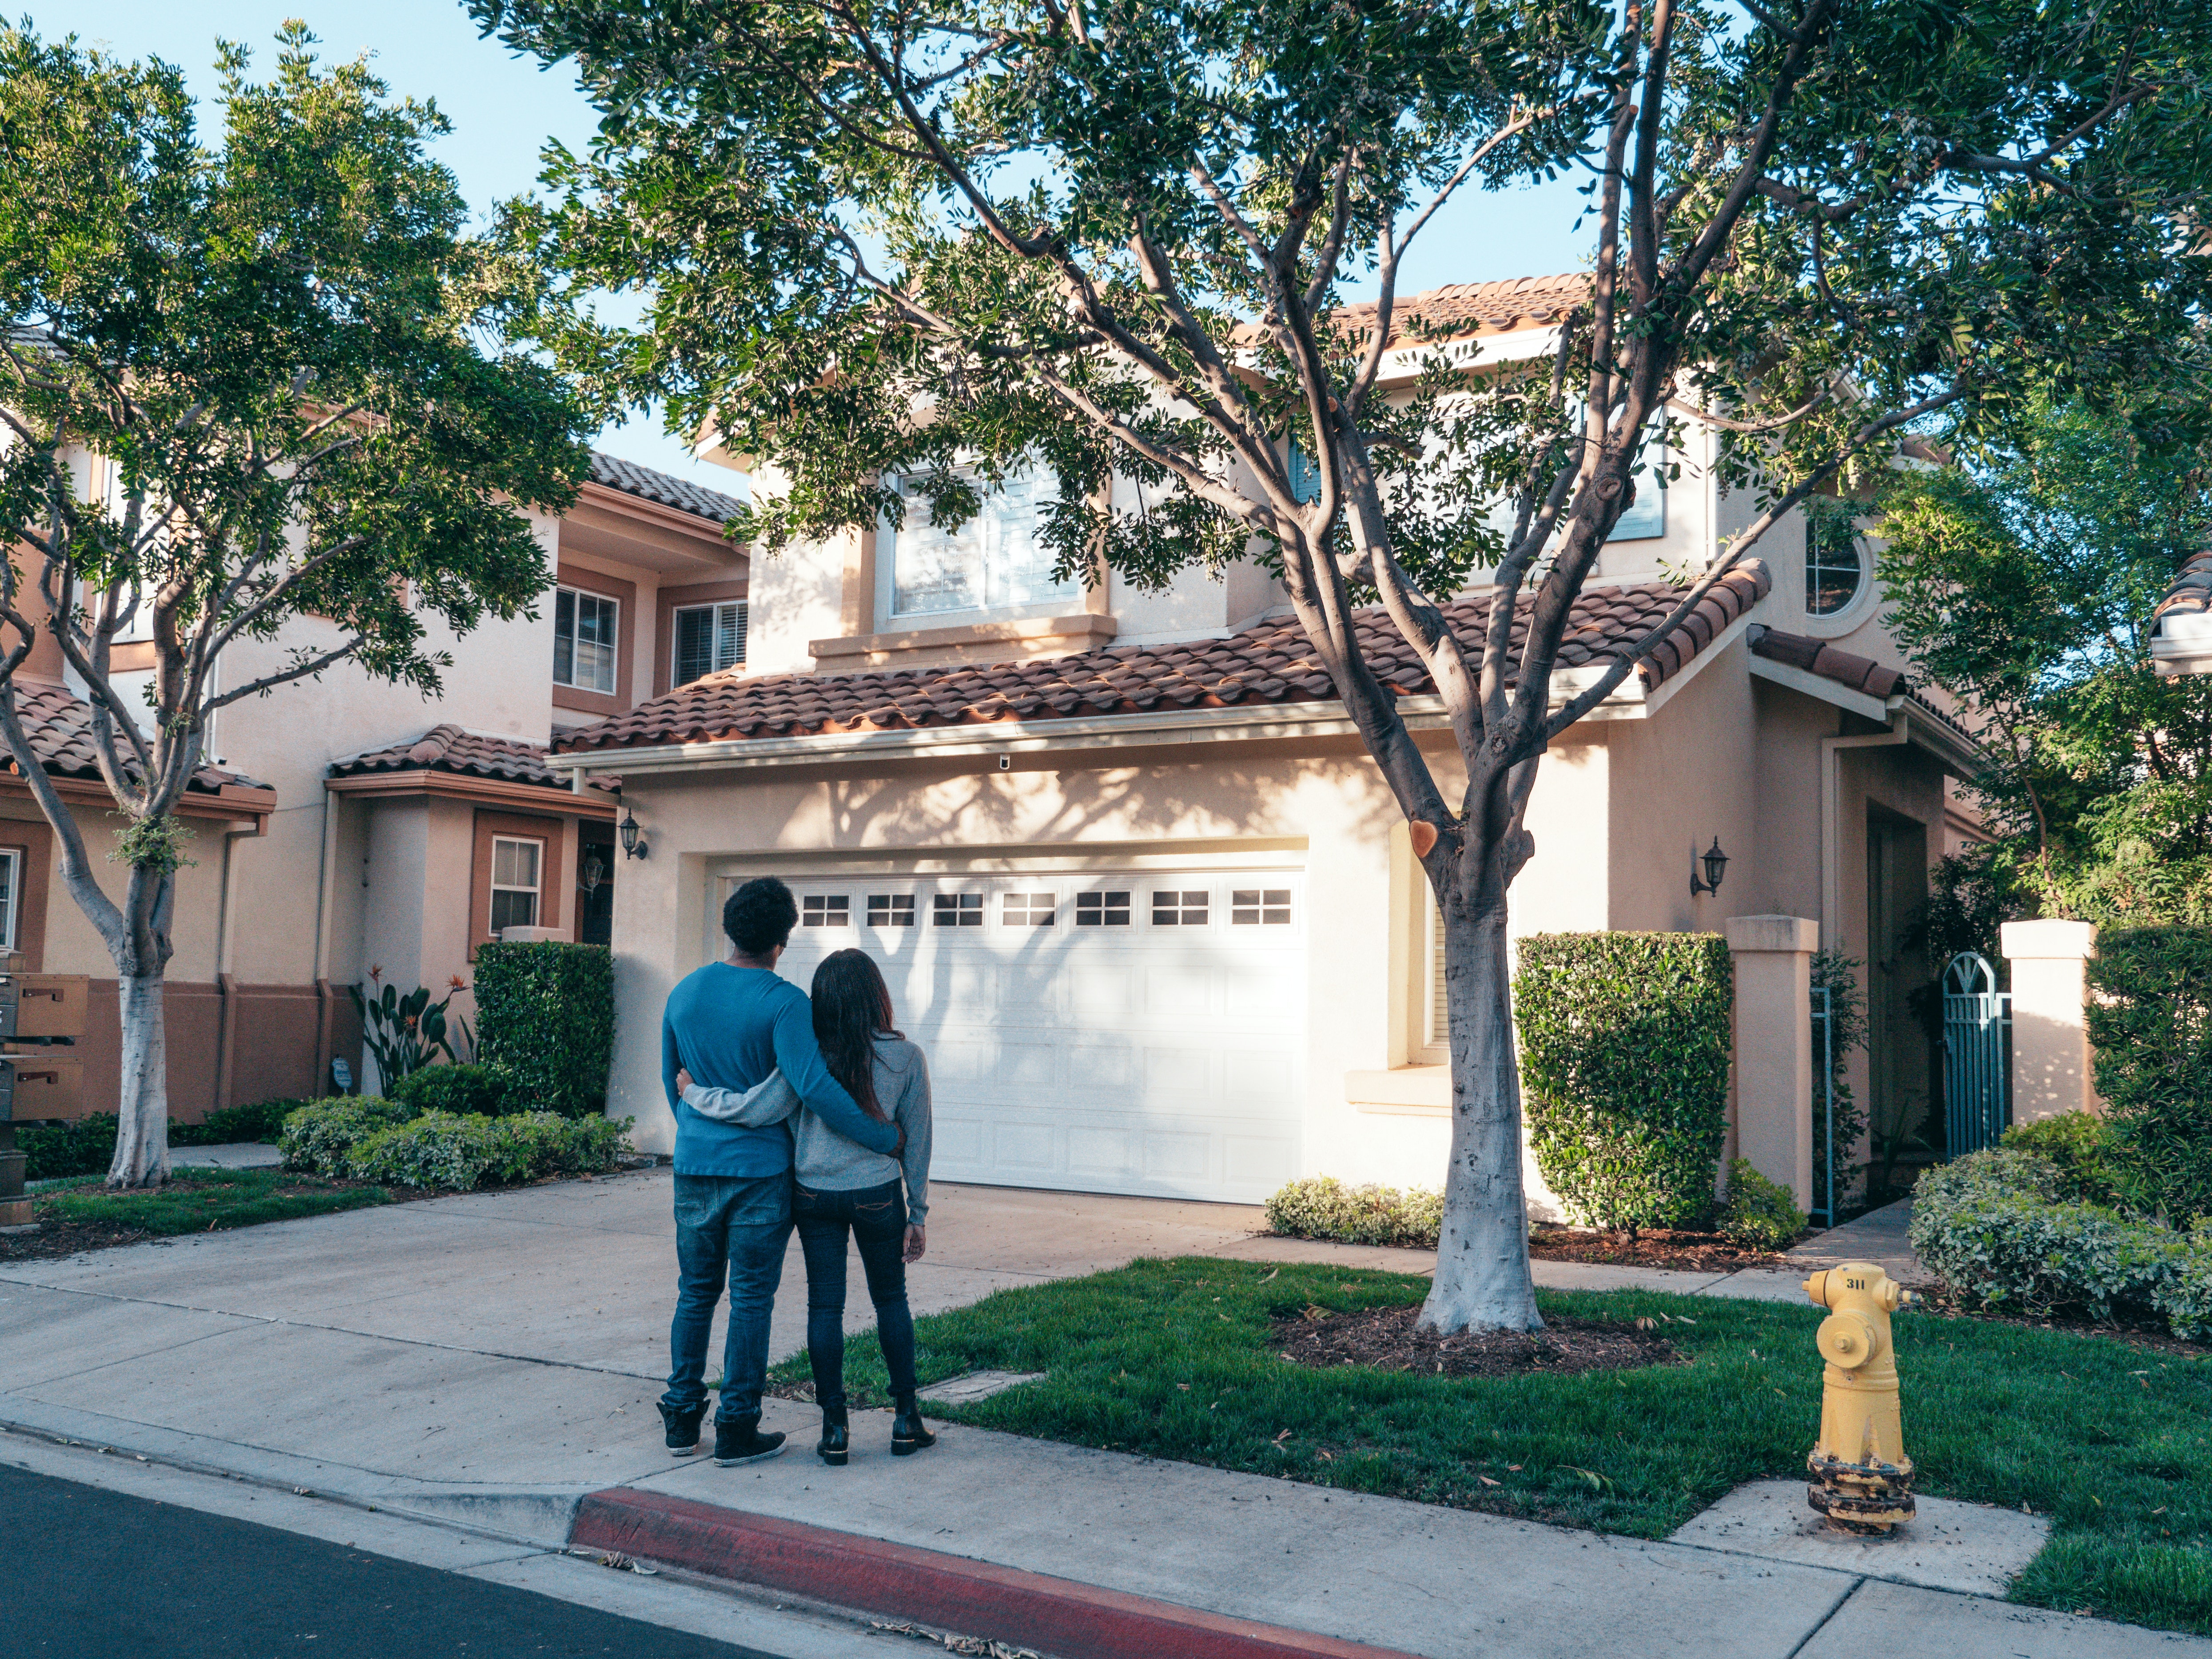 Couple in front of stucco home